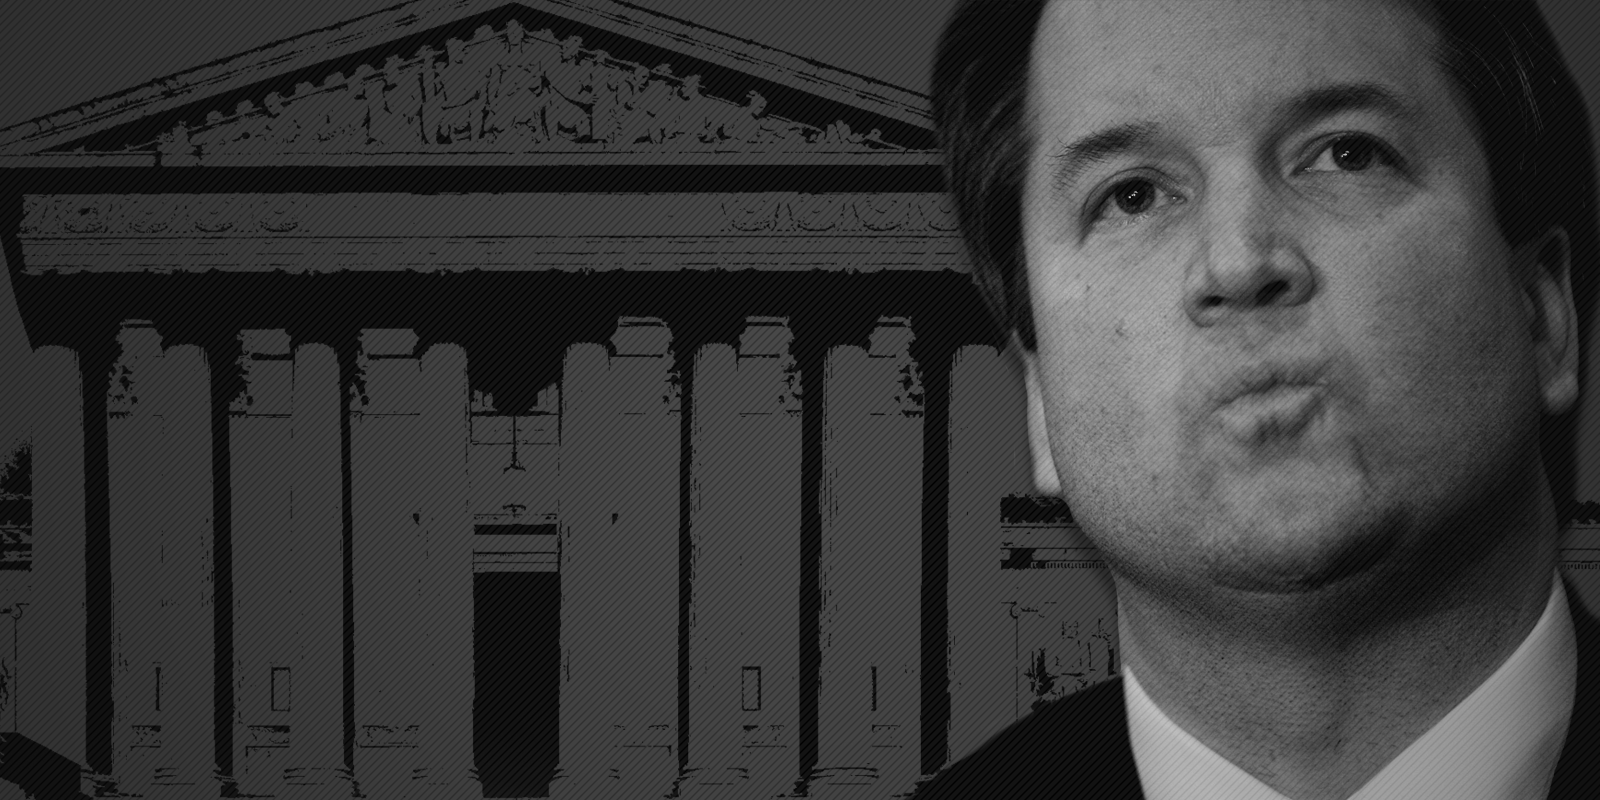 Keeping Kavanaugh Off the Supreme Court